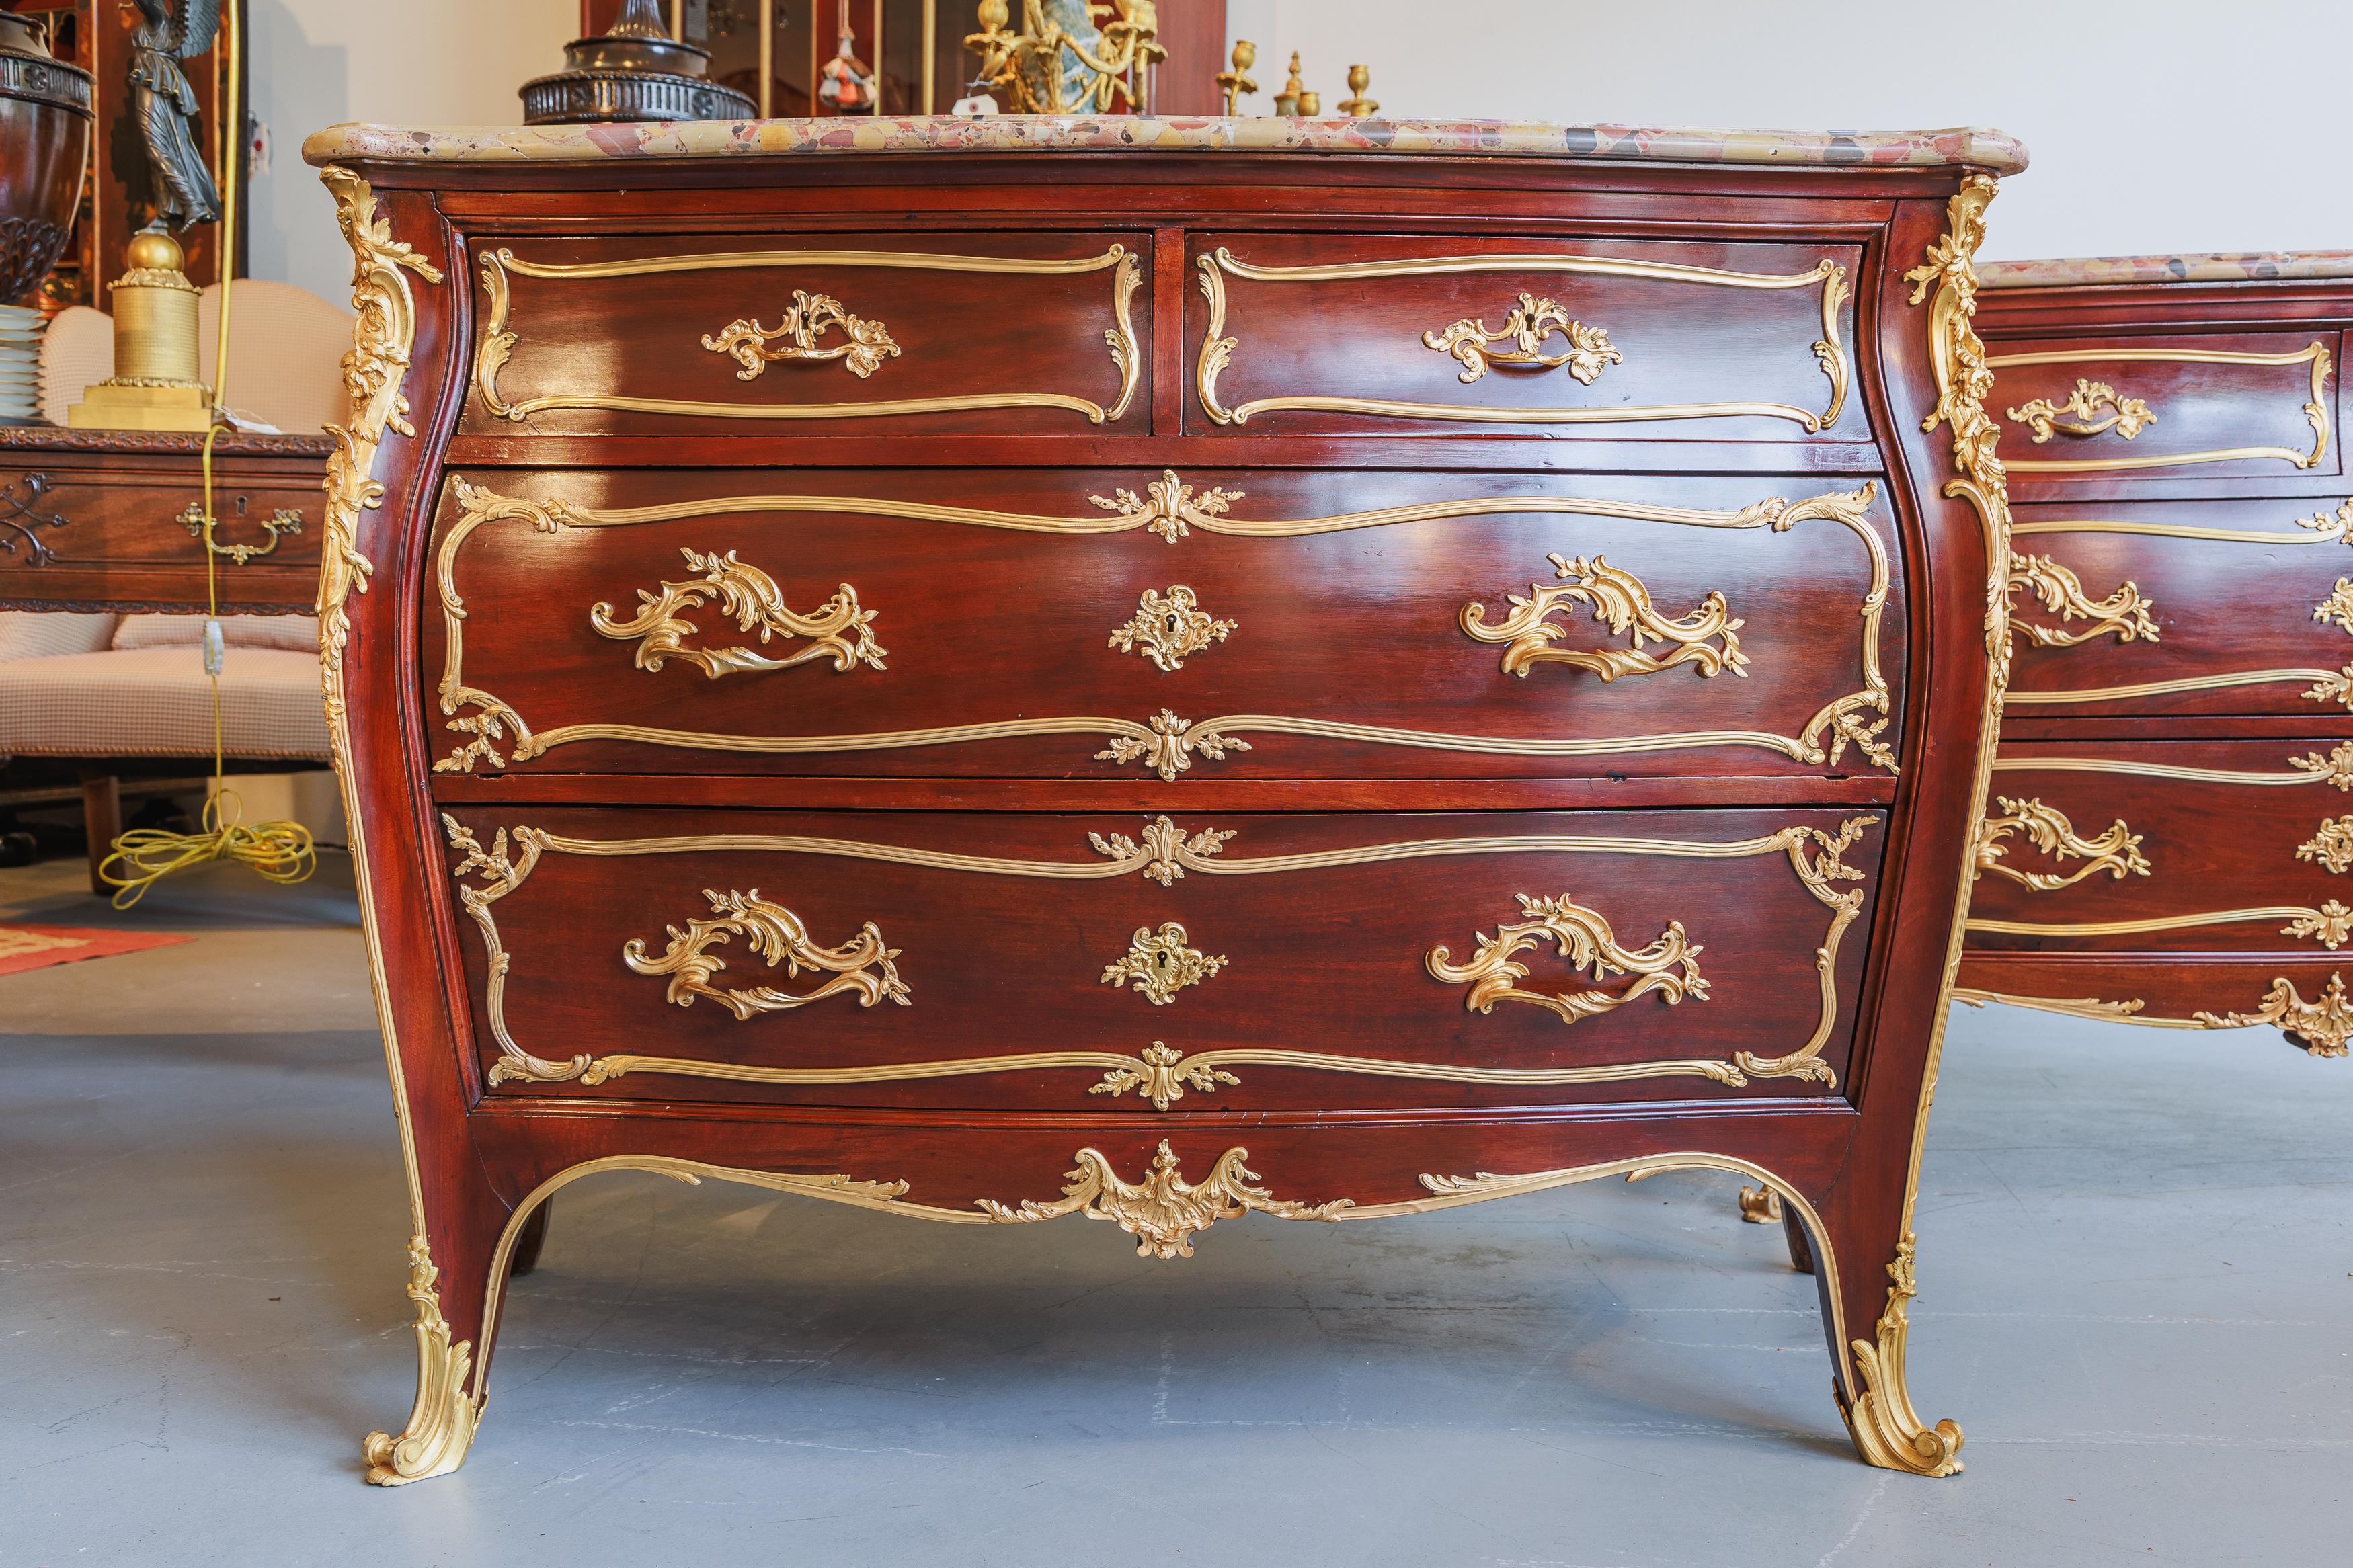 A fine and rare pair of late 19th century French mahogany and gilt bronze mounted mounted by F. Linke. The locks signed .
Original Breche D' Alep marble tops. ( Pictured in the 19th century book of French furniture by Christopher Payne with an